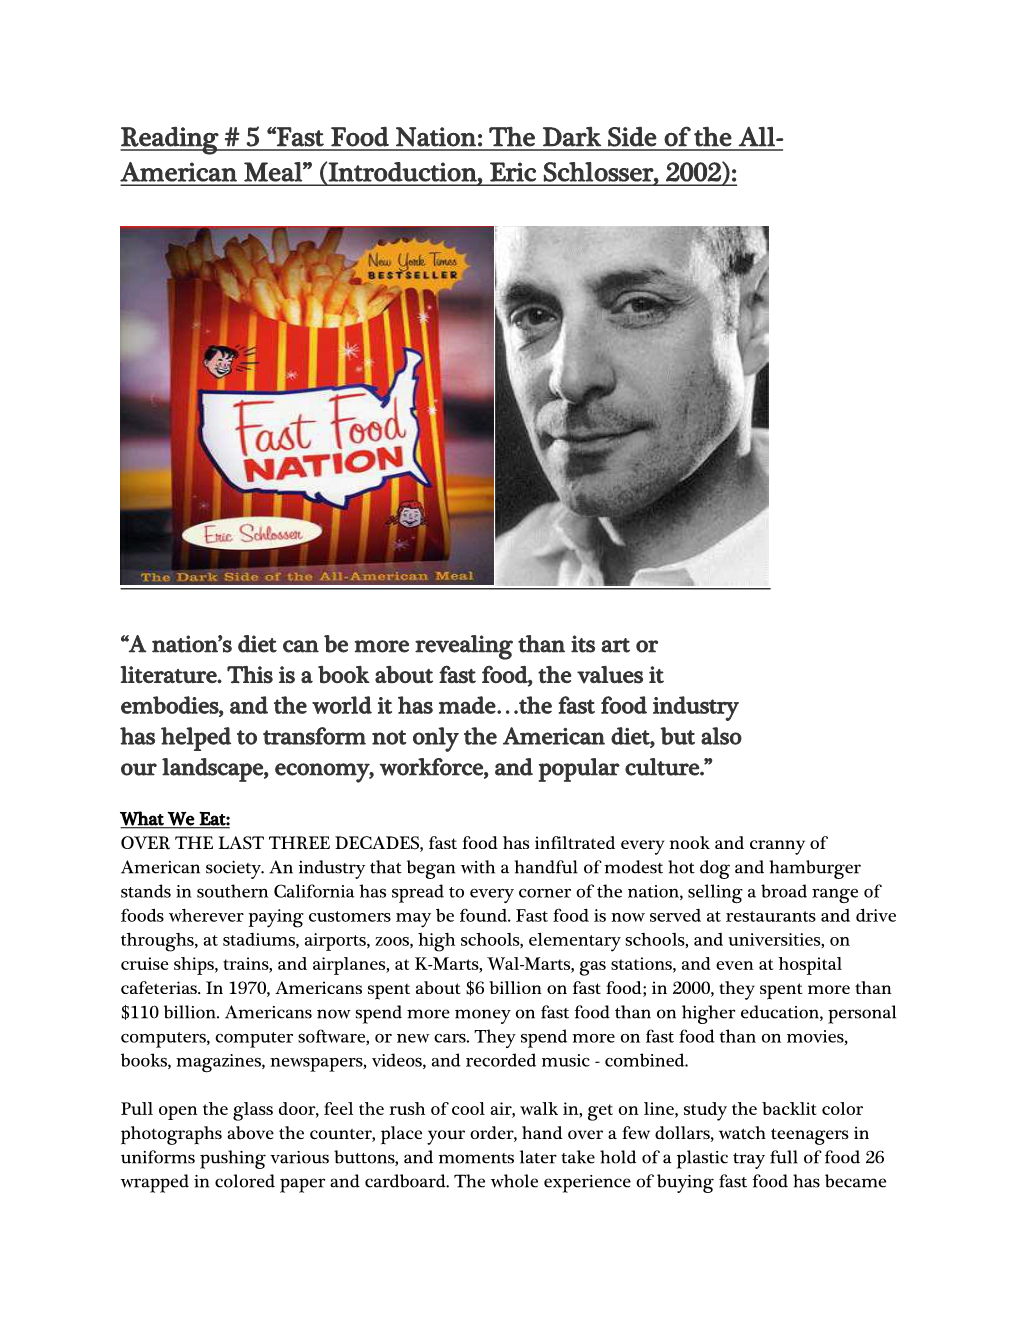 Reading # 5 “Fast Food Nation: the Dark Side of the All- American Meal” (Introduction, Eric Schlosser, 2002)